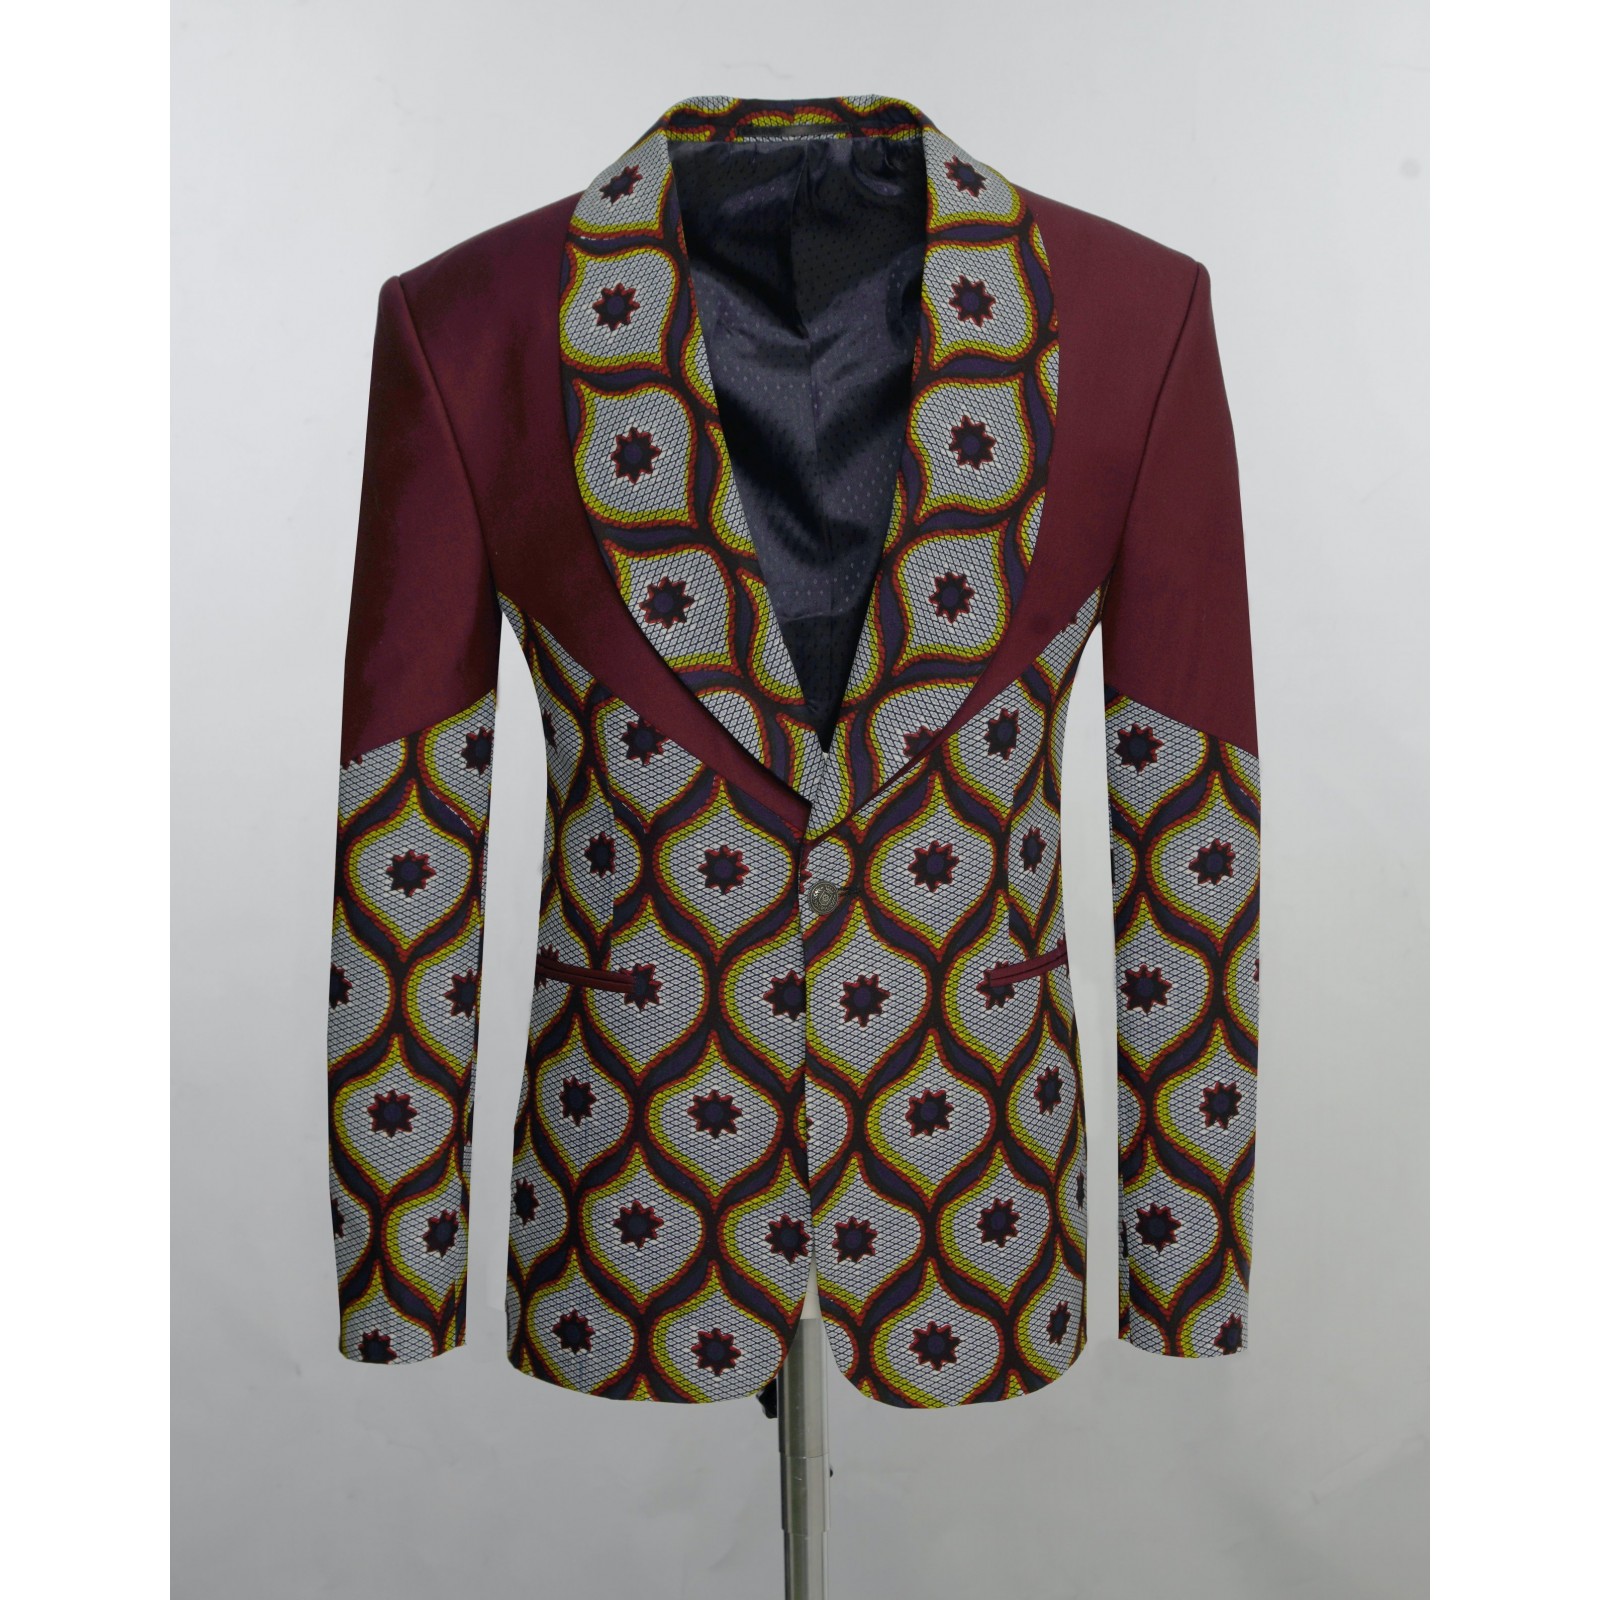 Burgundy with Multicolor Patterned Tuxedo